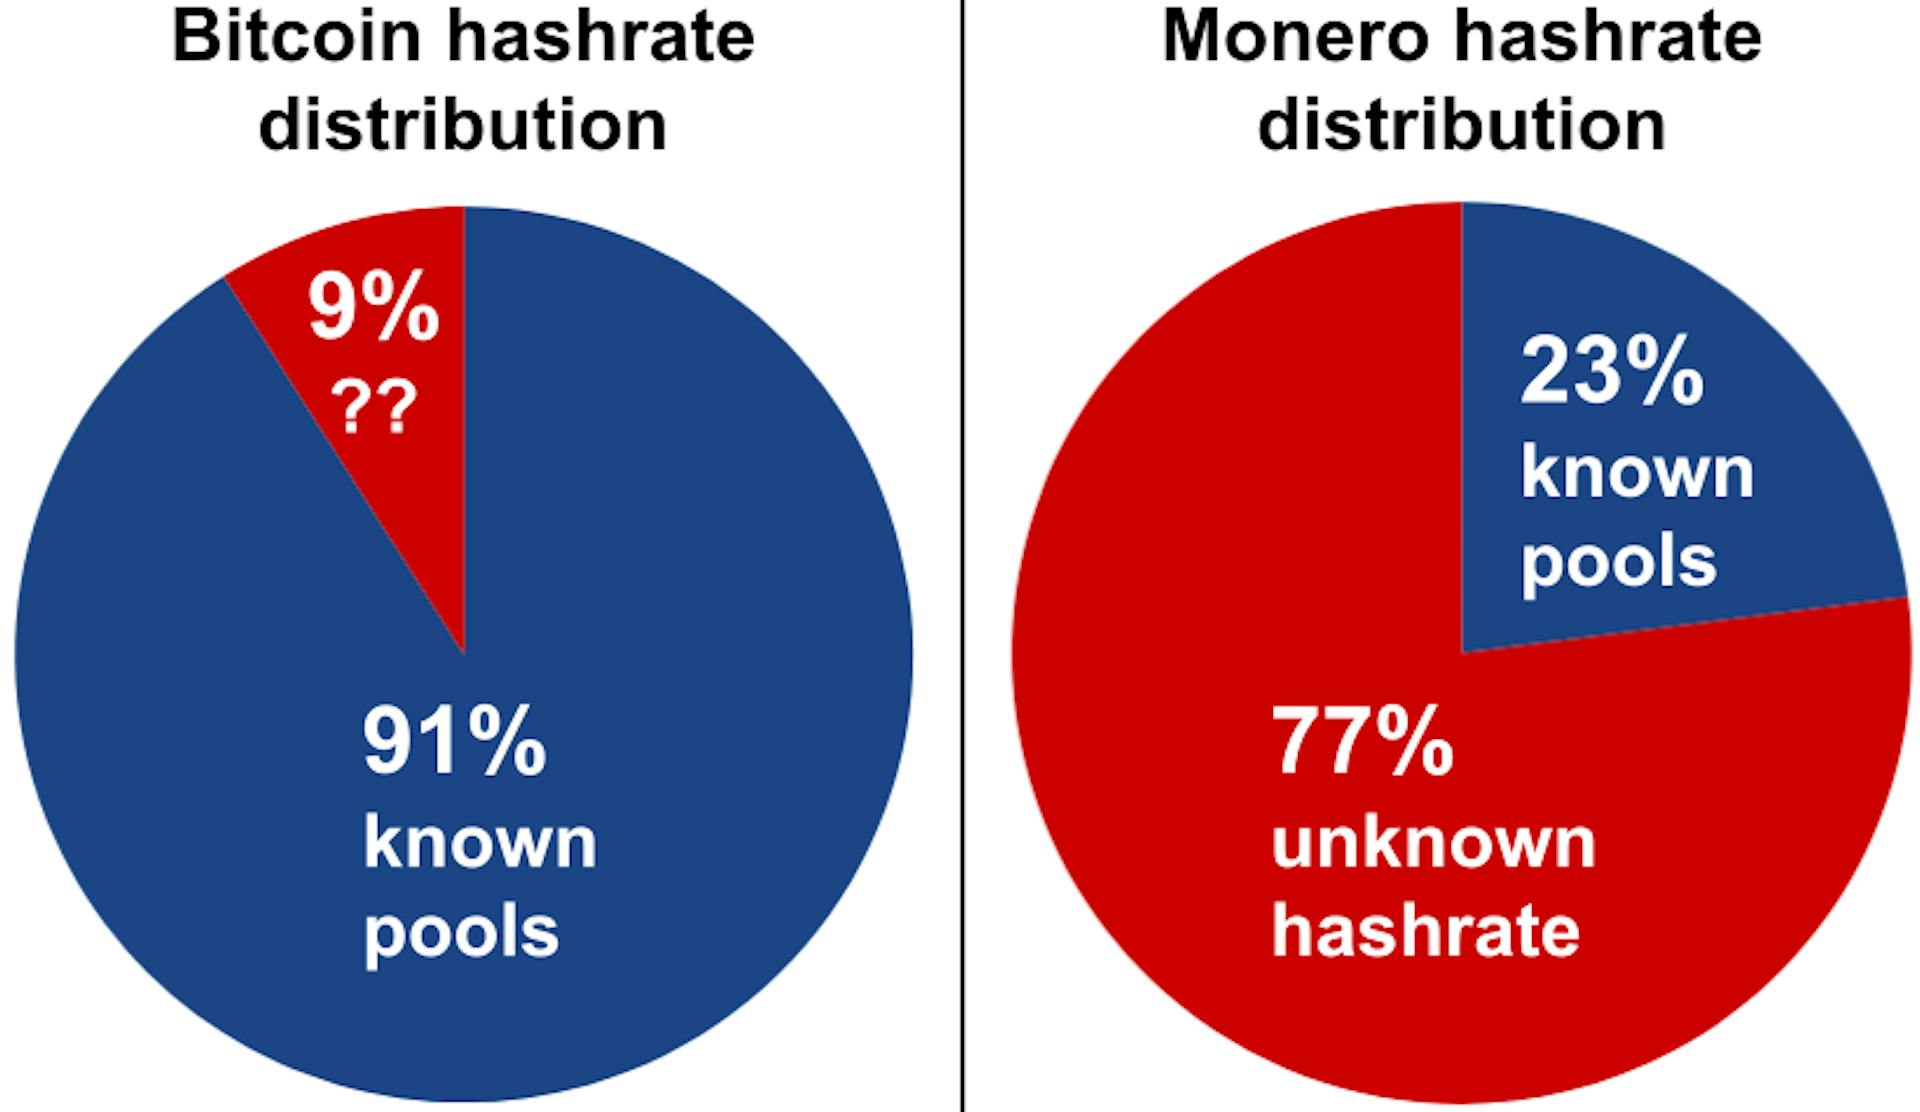 featured image - Opportunistic investigation of Monero miners during April 2018 network update